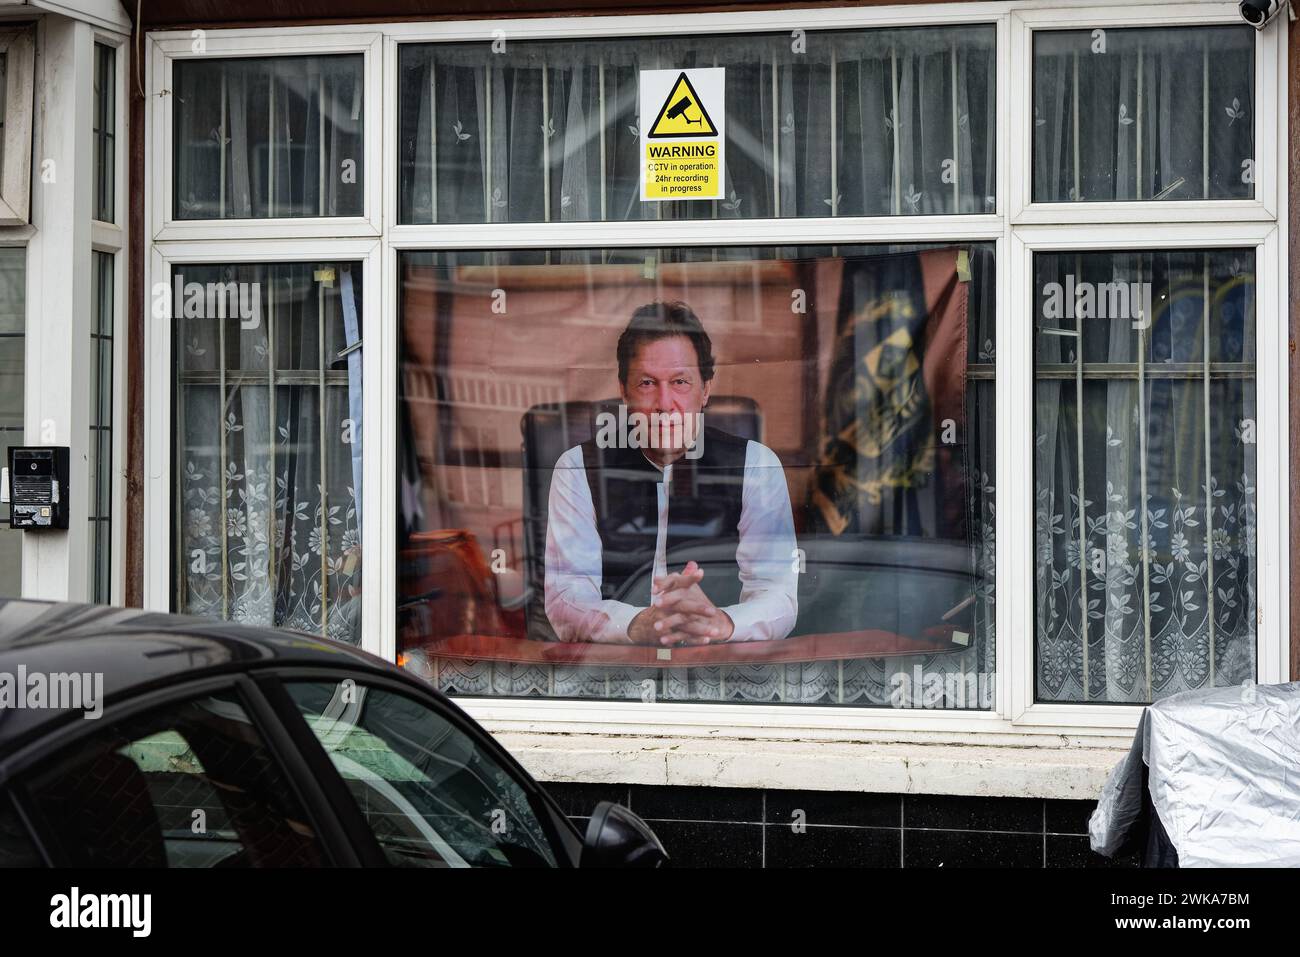 A large poster of the jailed Pakistan politician Imran Khan on display in a suburban house window in Southall Wets London England UK Stock Photo